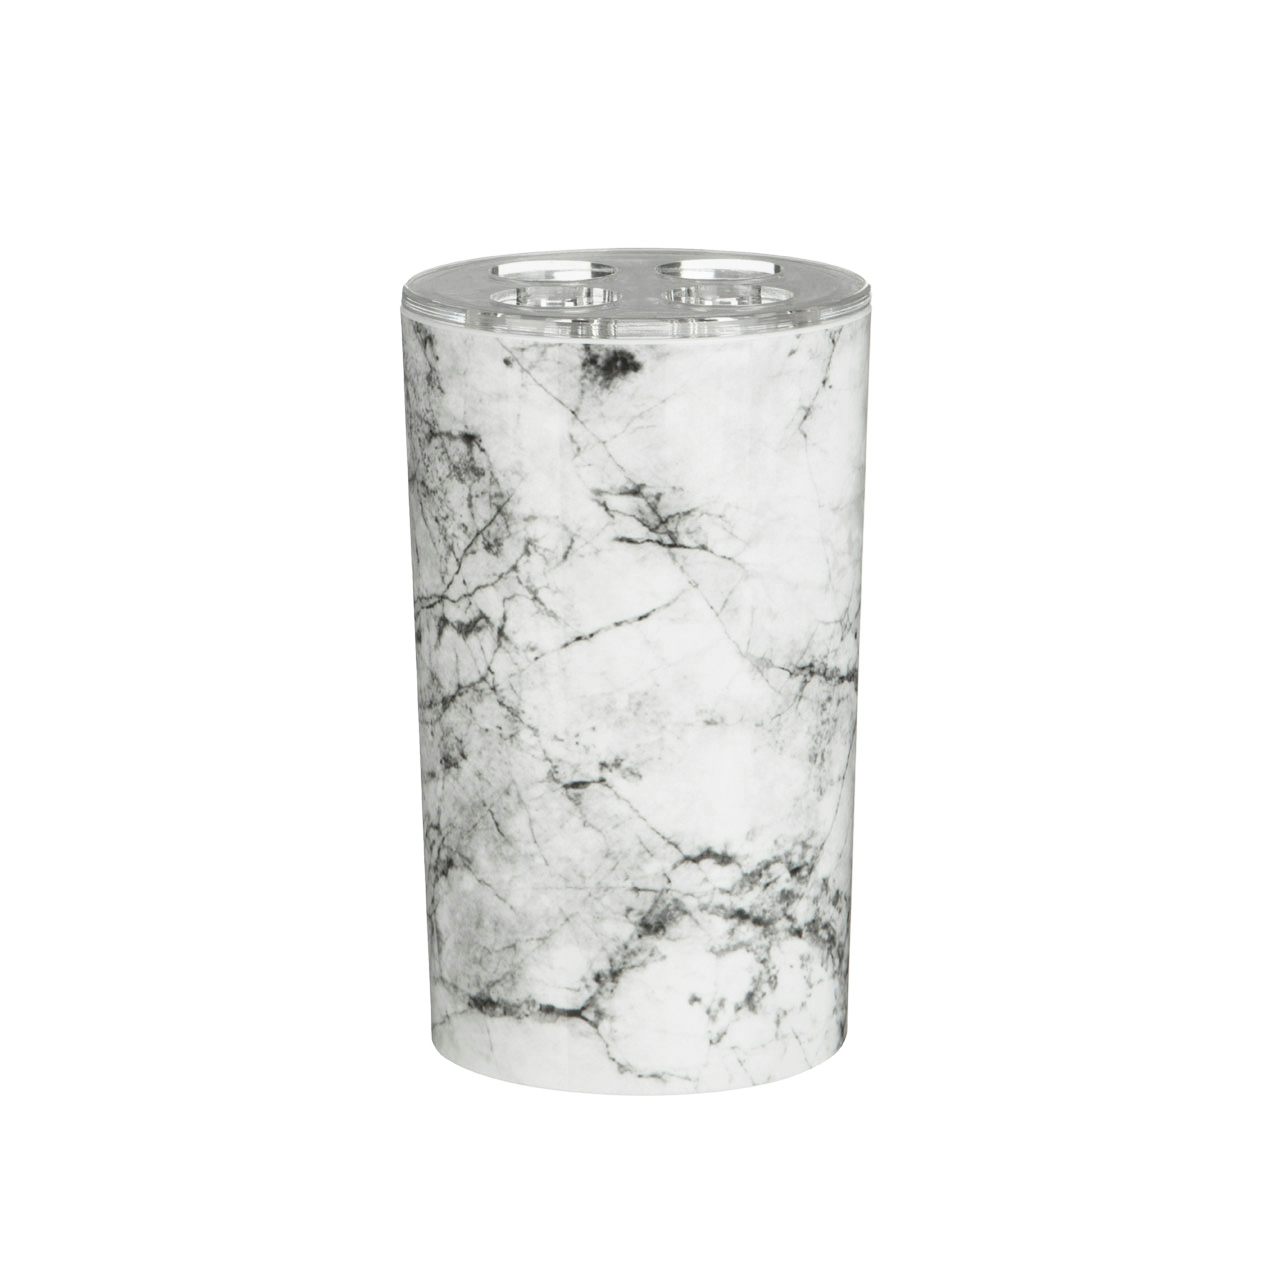 Accents Rome black and white marble effect toothbrush holder